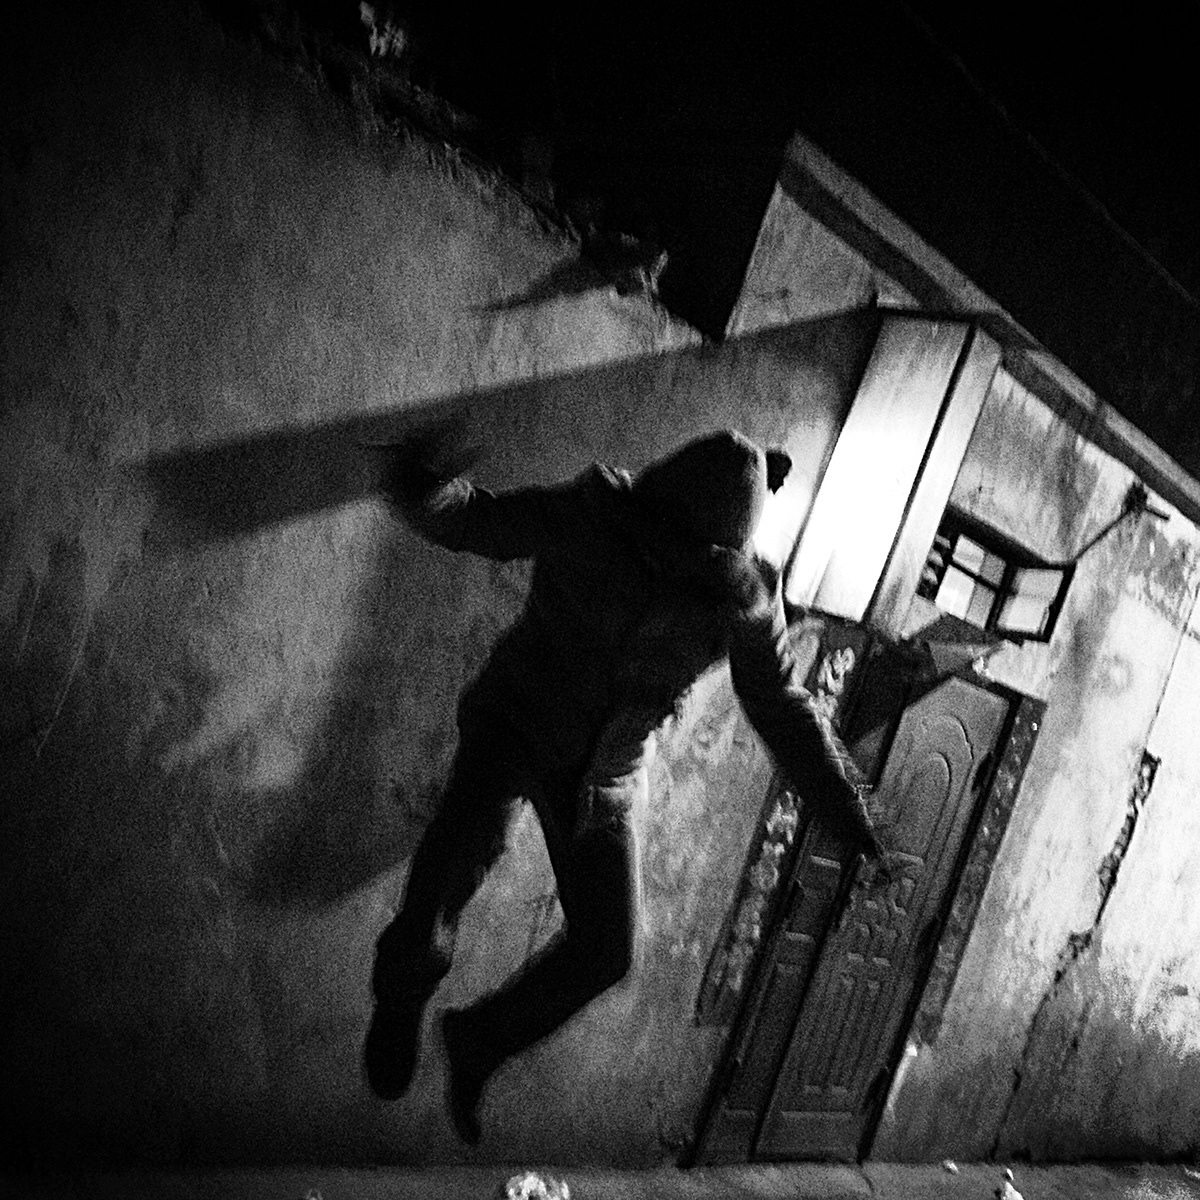 b&w jump china night friend winter iPhoneography childhood home boy game air jiuquan Gansu the game places